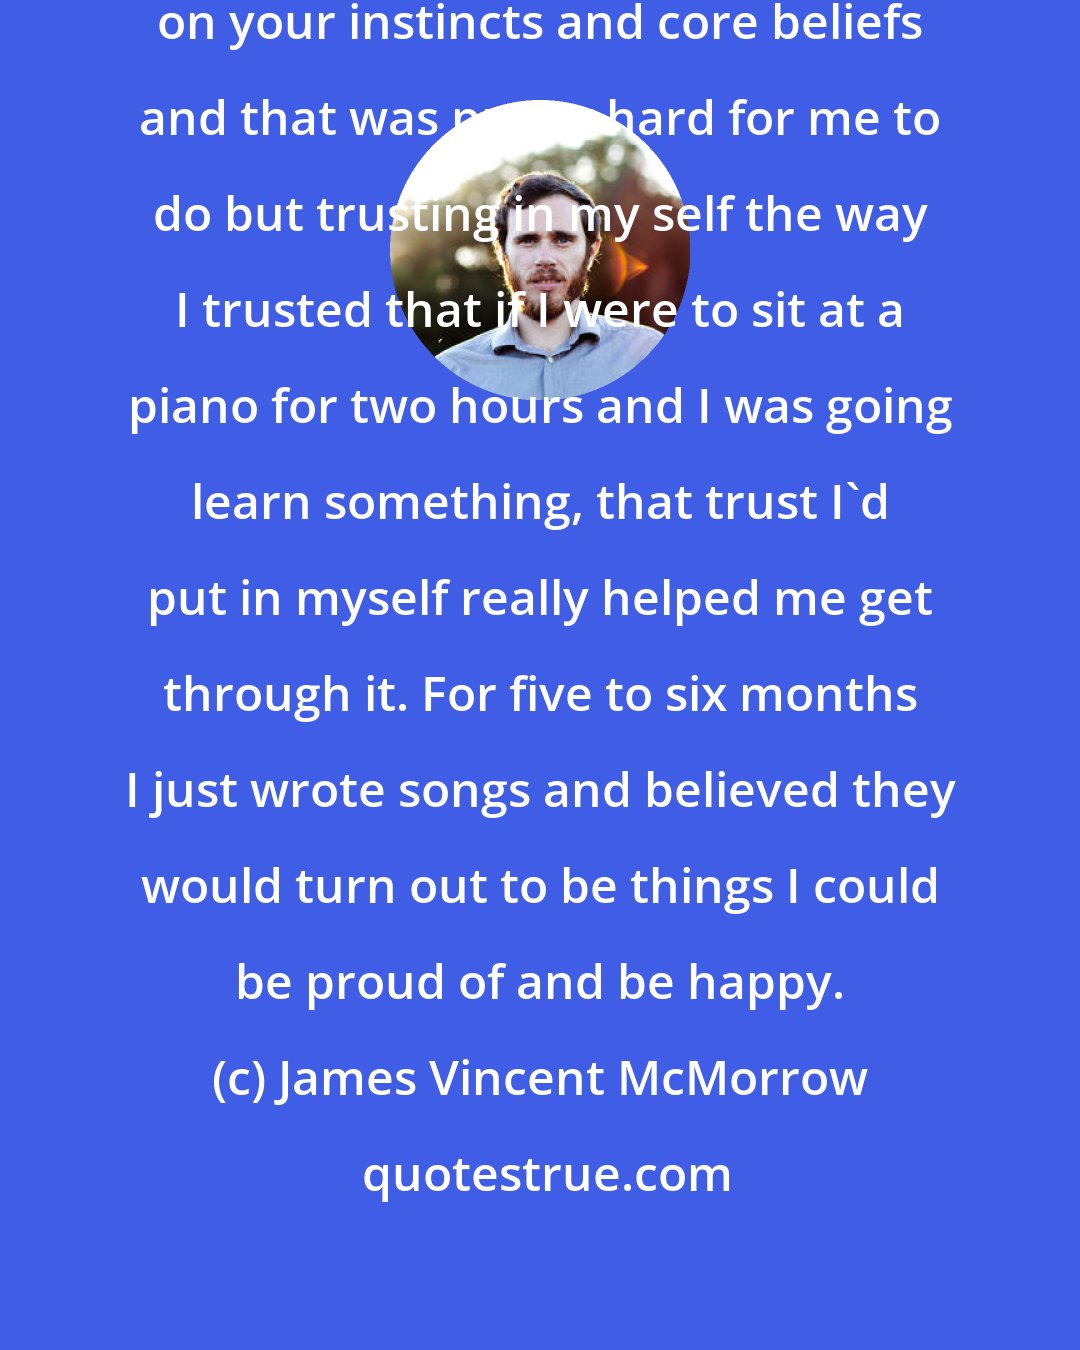 James Vincent McMorrow: Its always important to fall back on your instincts and core beliefs and that was pretty hard for me to do but trusting in my self the way I trusted that if I were to sit at a piano for two hours and I was going learn something, that trust I'd put in myself really helped me get through it. For five to six months I just wrote songs and believed they would turn out to be things I could be proud of and be happy.